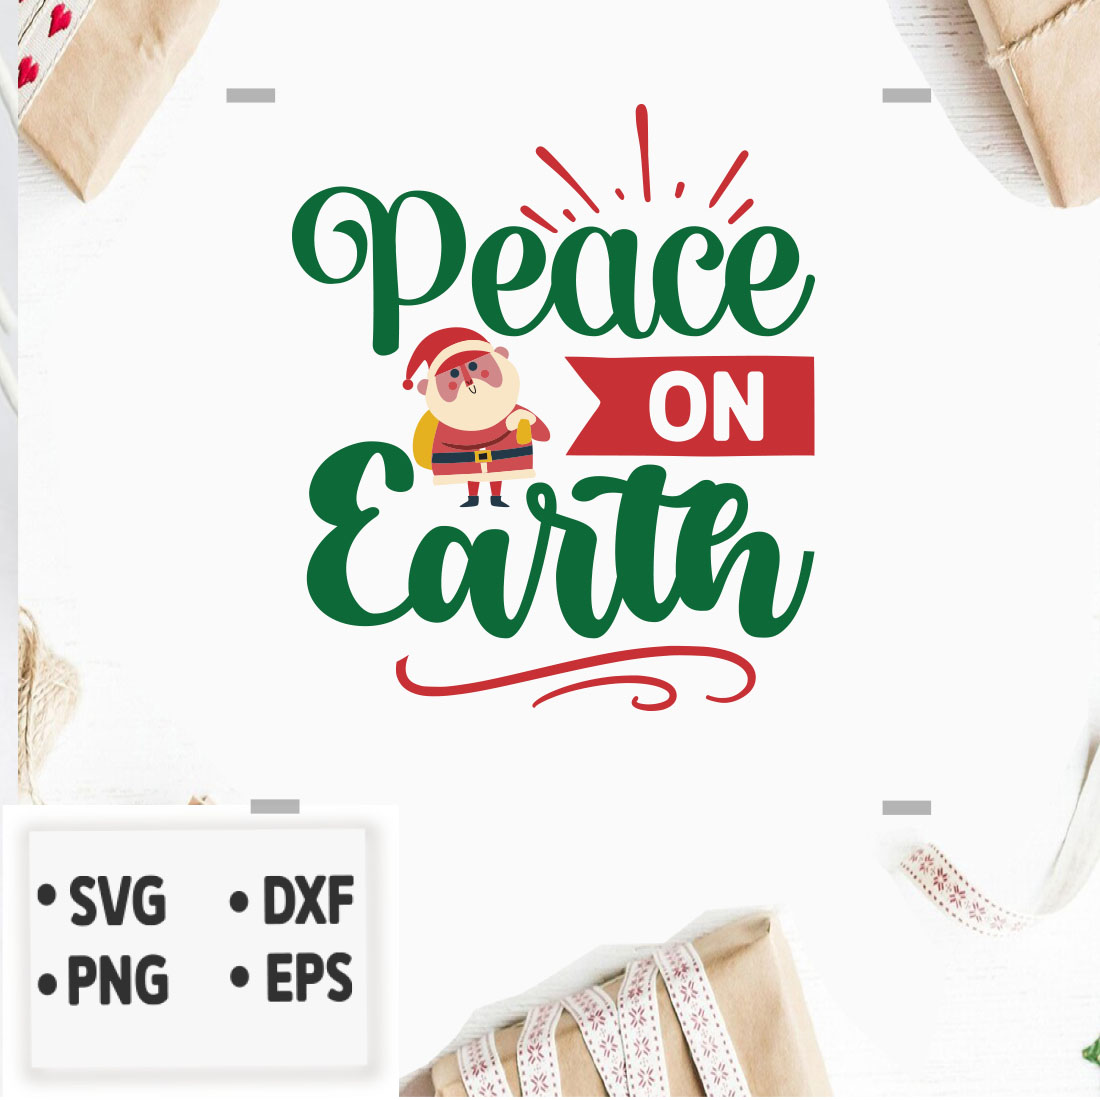 Image with charming print Peace on earth.